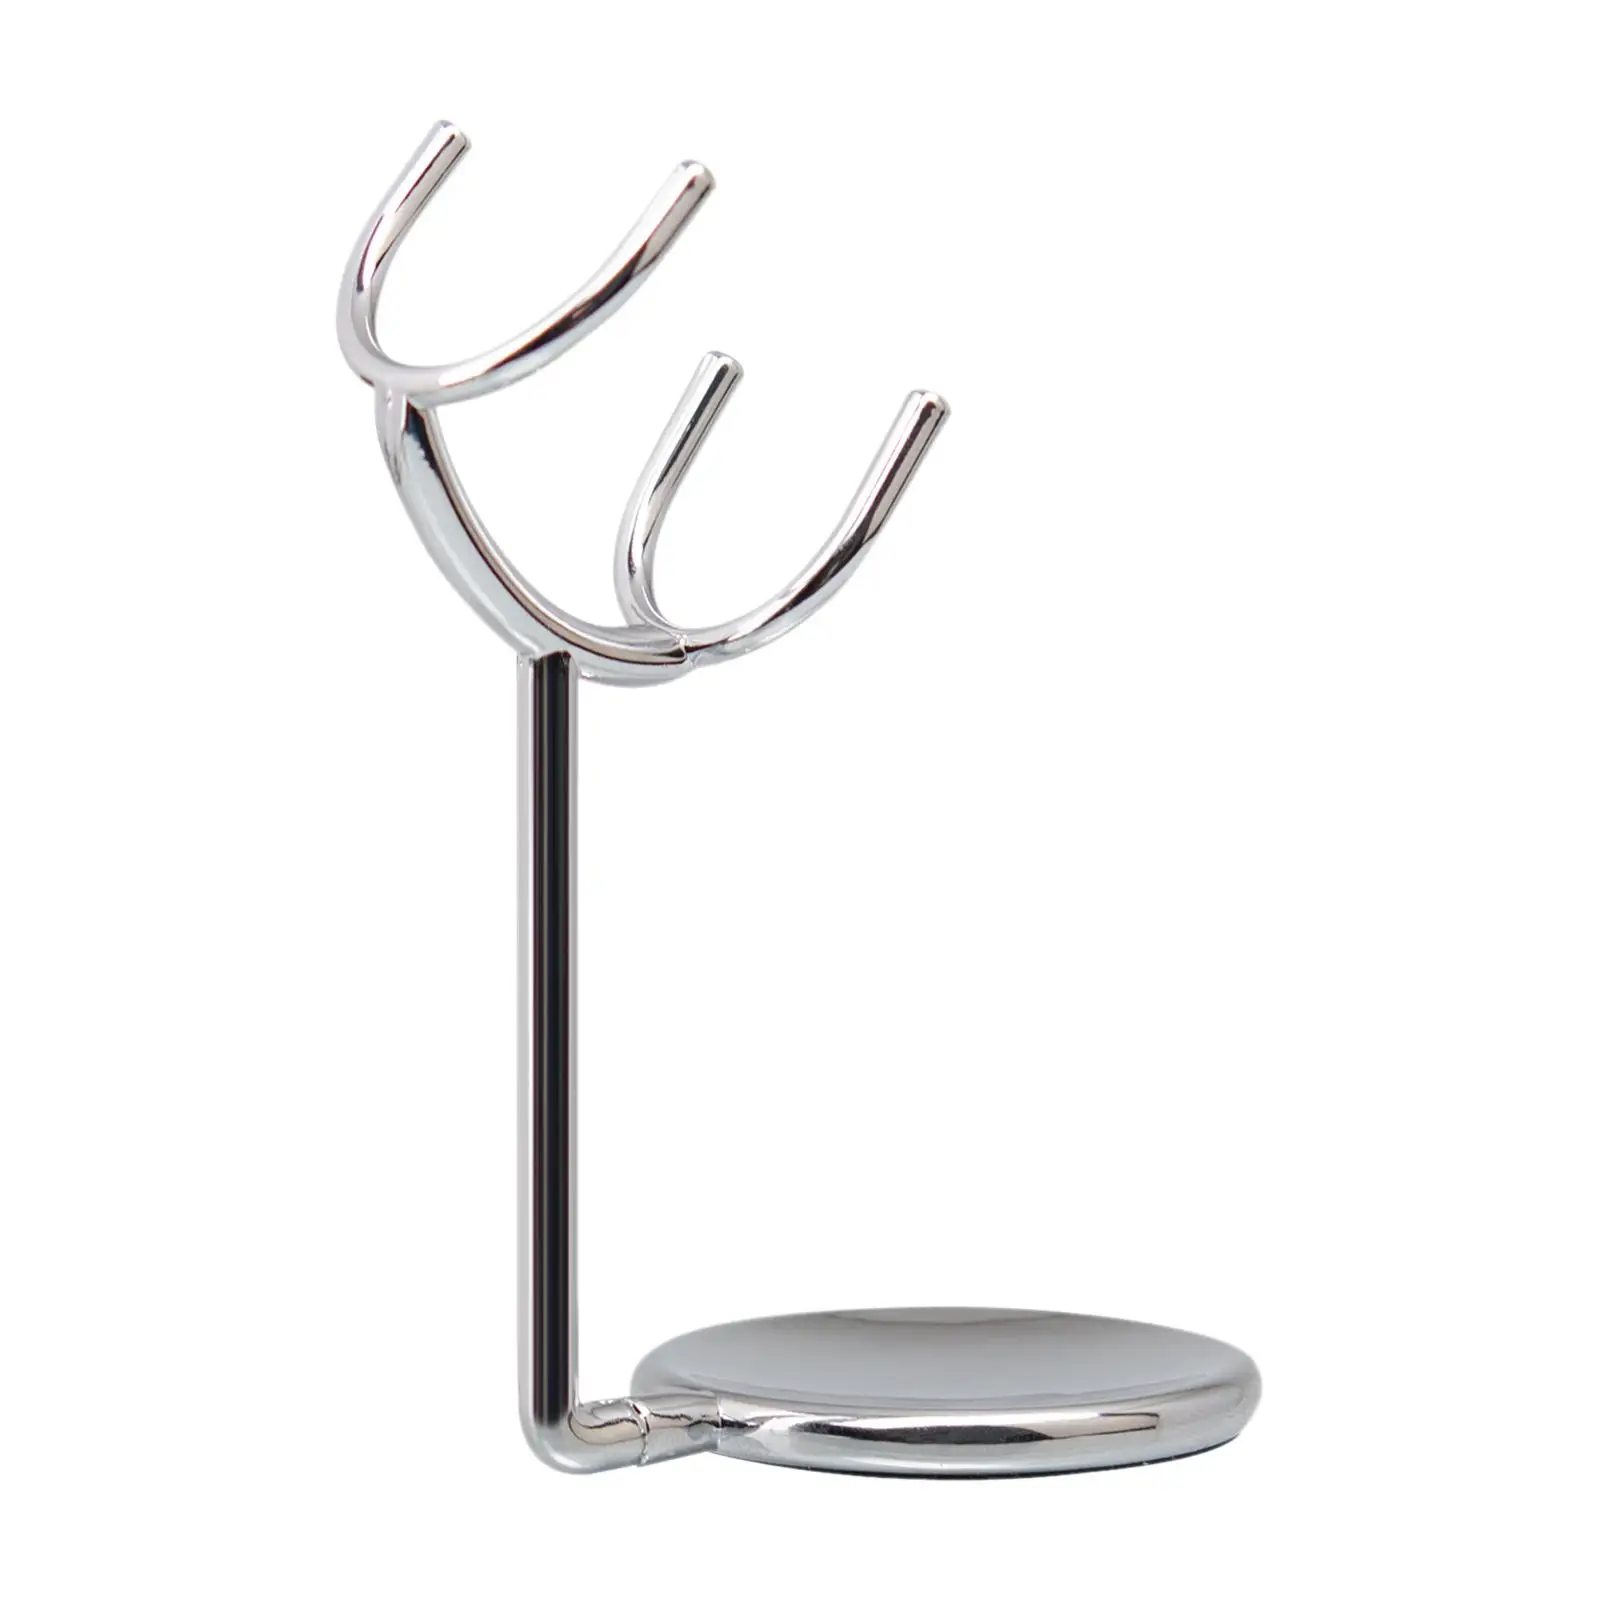 Manual Shaver Holder Bathroom Accessories Wide Openings Modern Rack Gifts Weighted Base Storage Organization Shaver Hanger Alloy